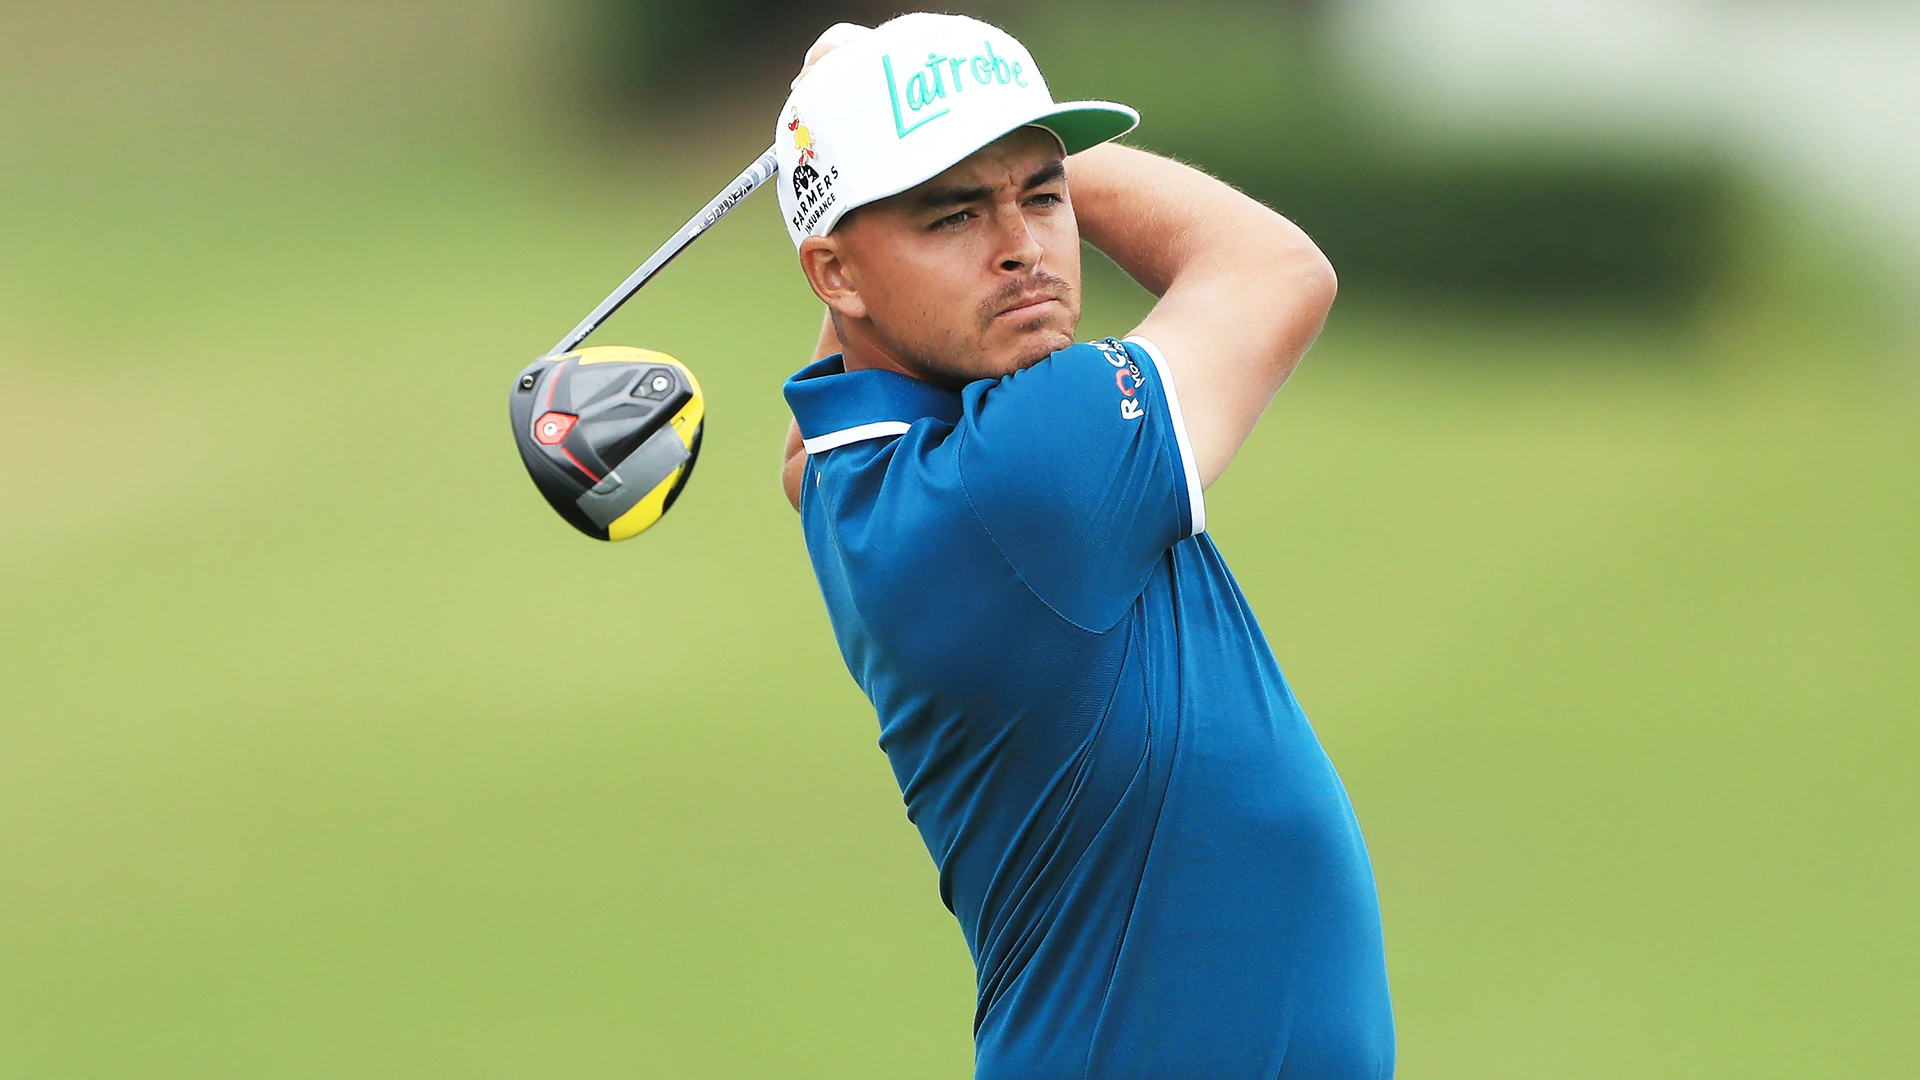 Rickie Fowler grouped with Webb Simpson, Nate Lashley at Rocket Mortgage